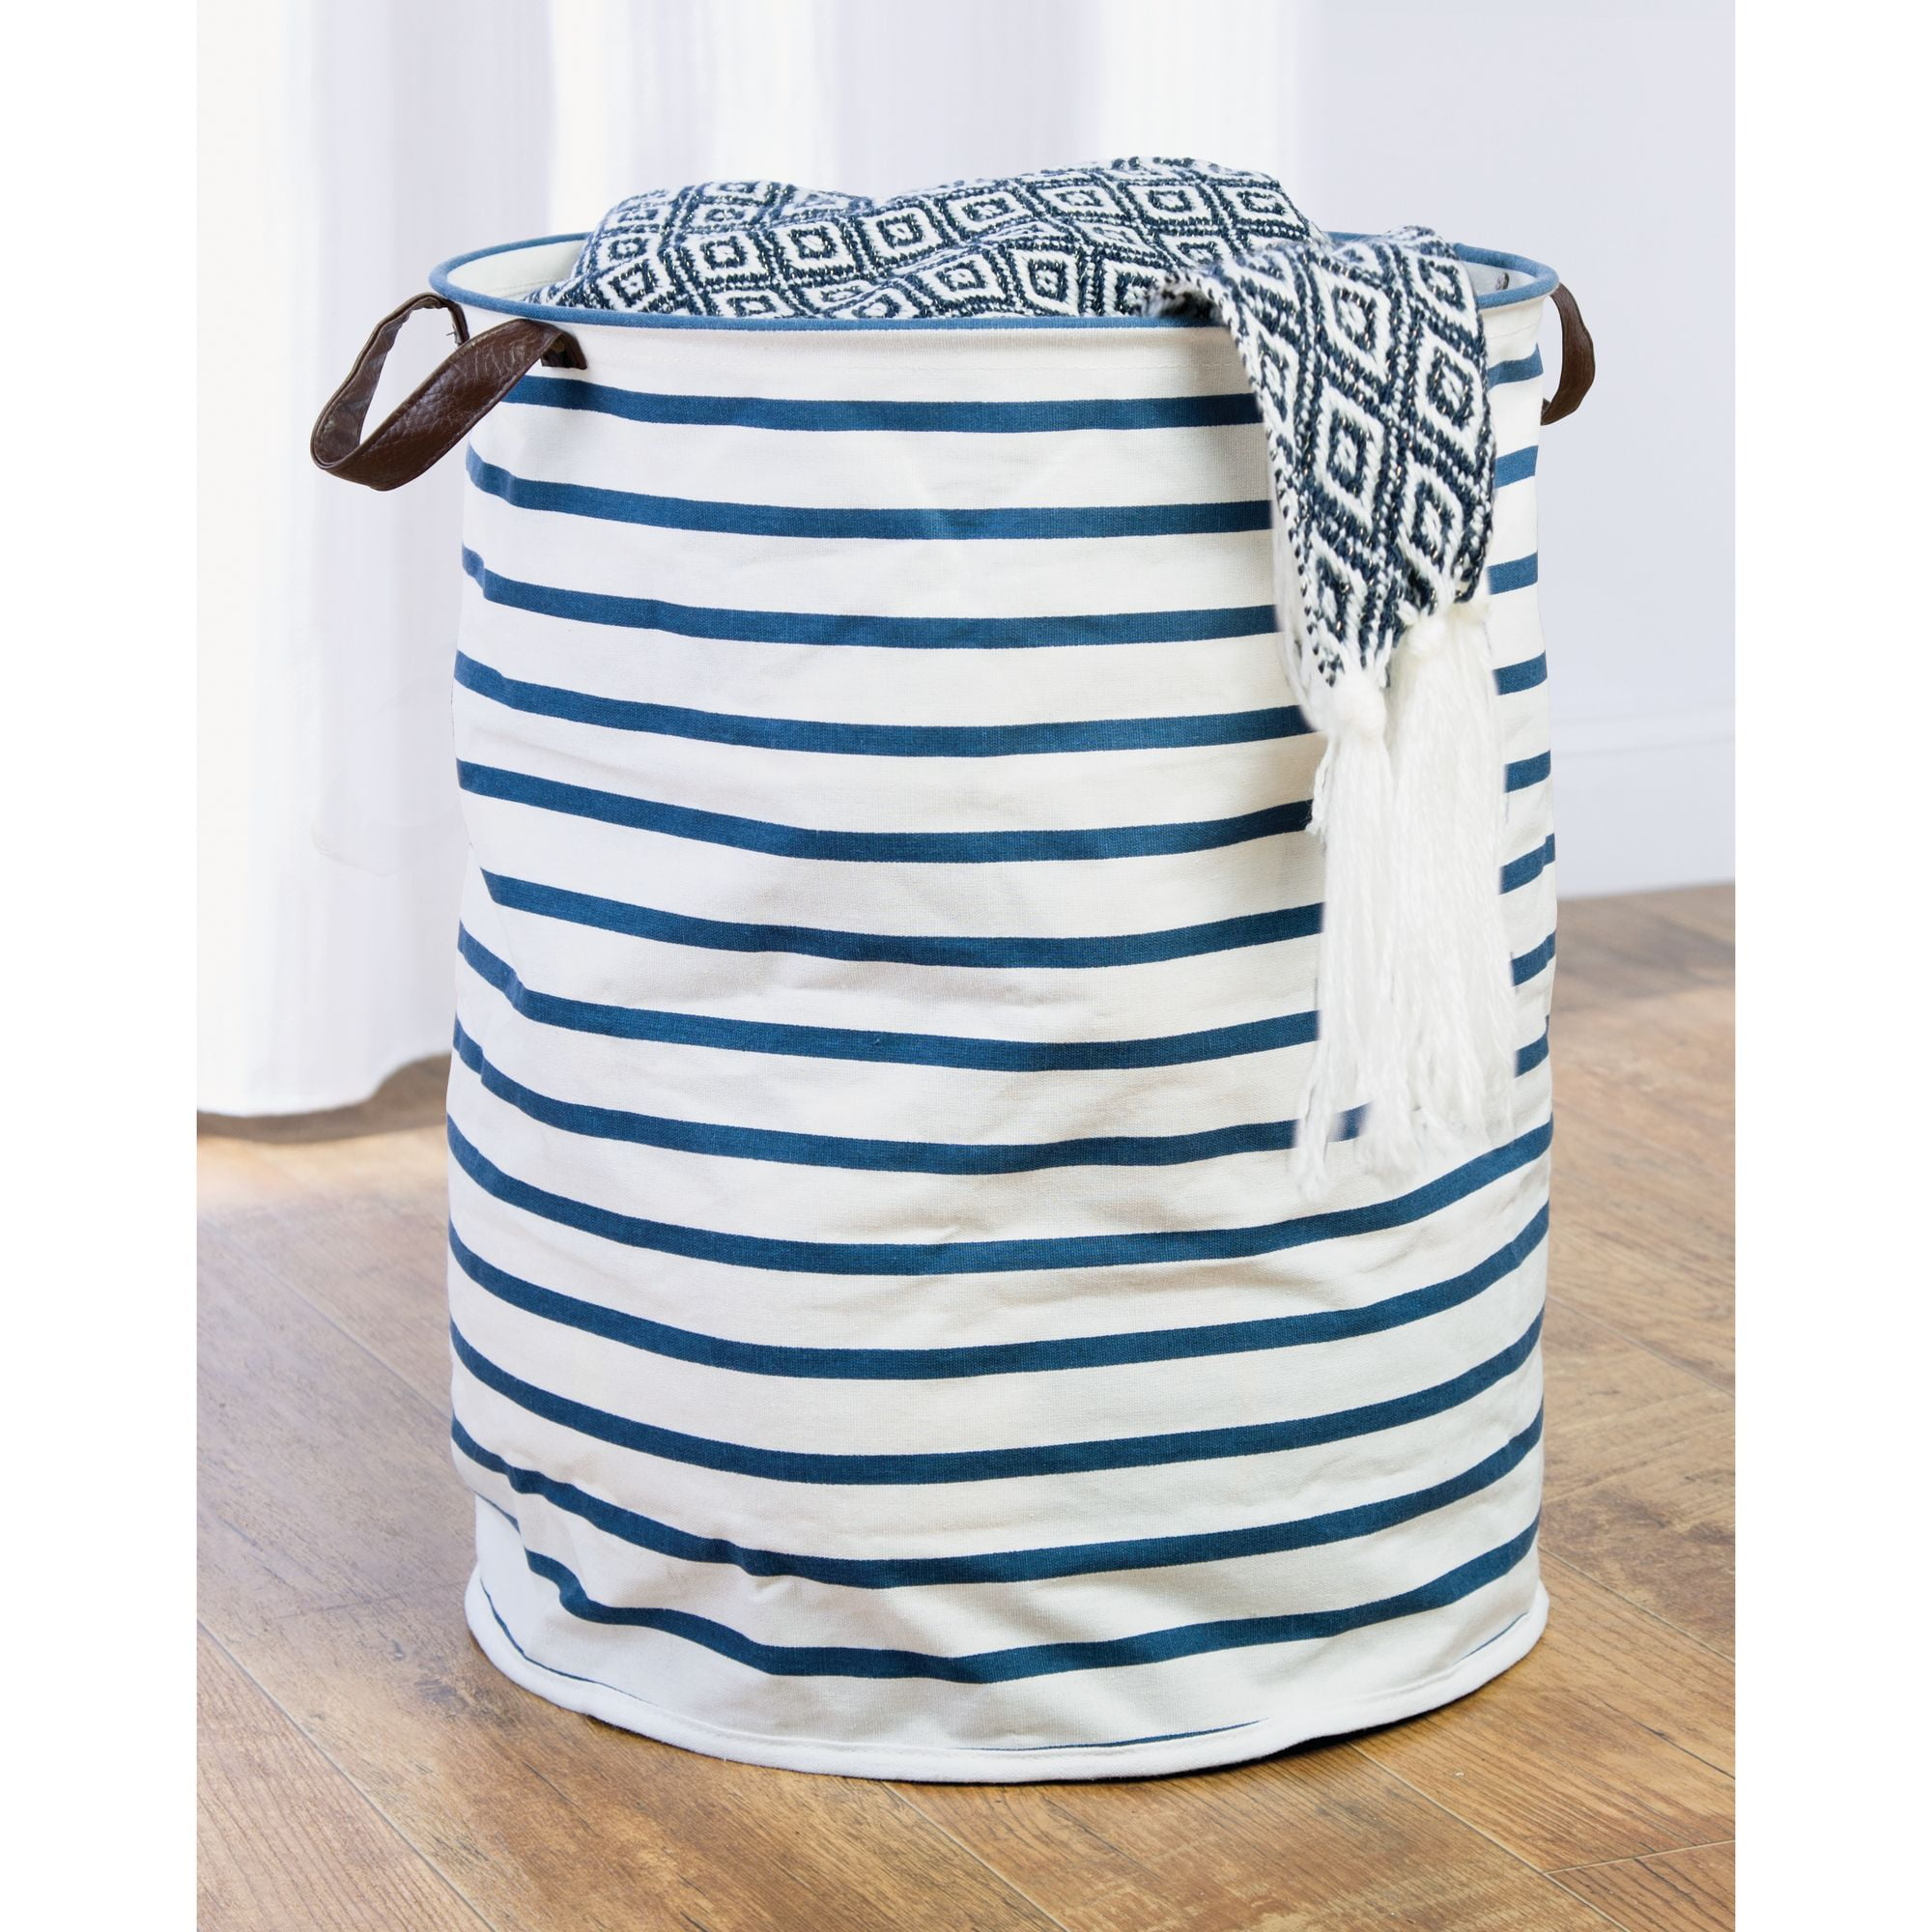 Bedroom and Wardrobe Organiser with Handles Poly Canvas Large Nursery Blue/White InterDesign Riley Household Storage Basket 